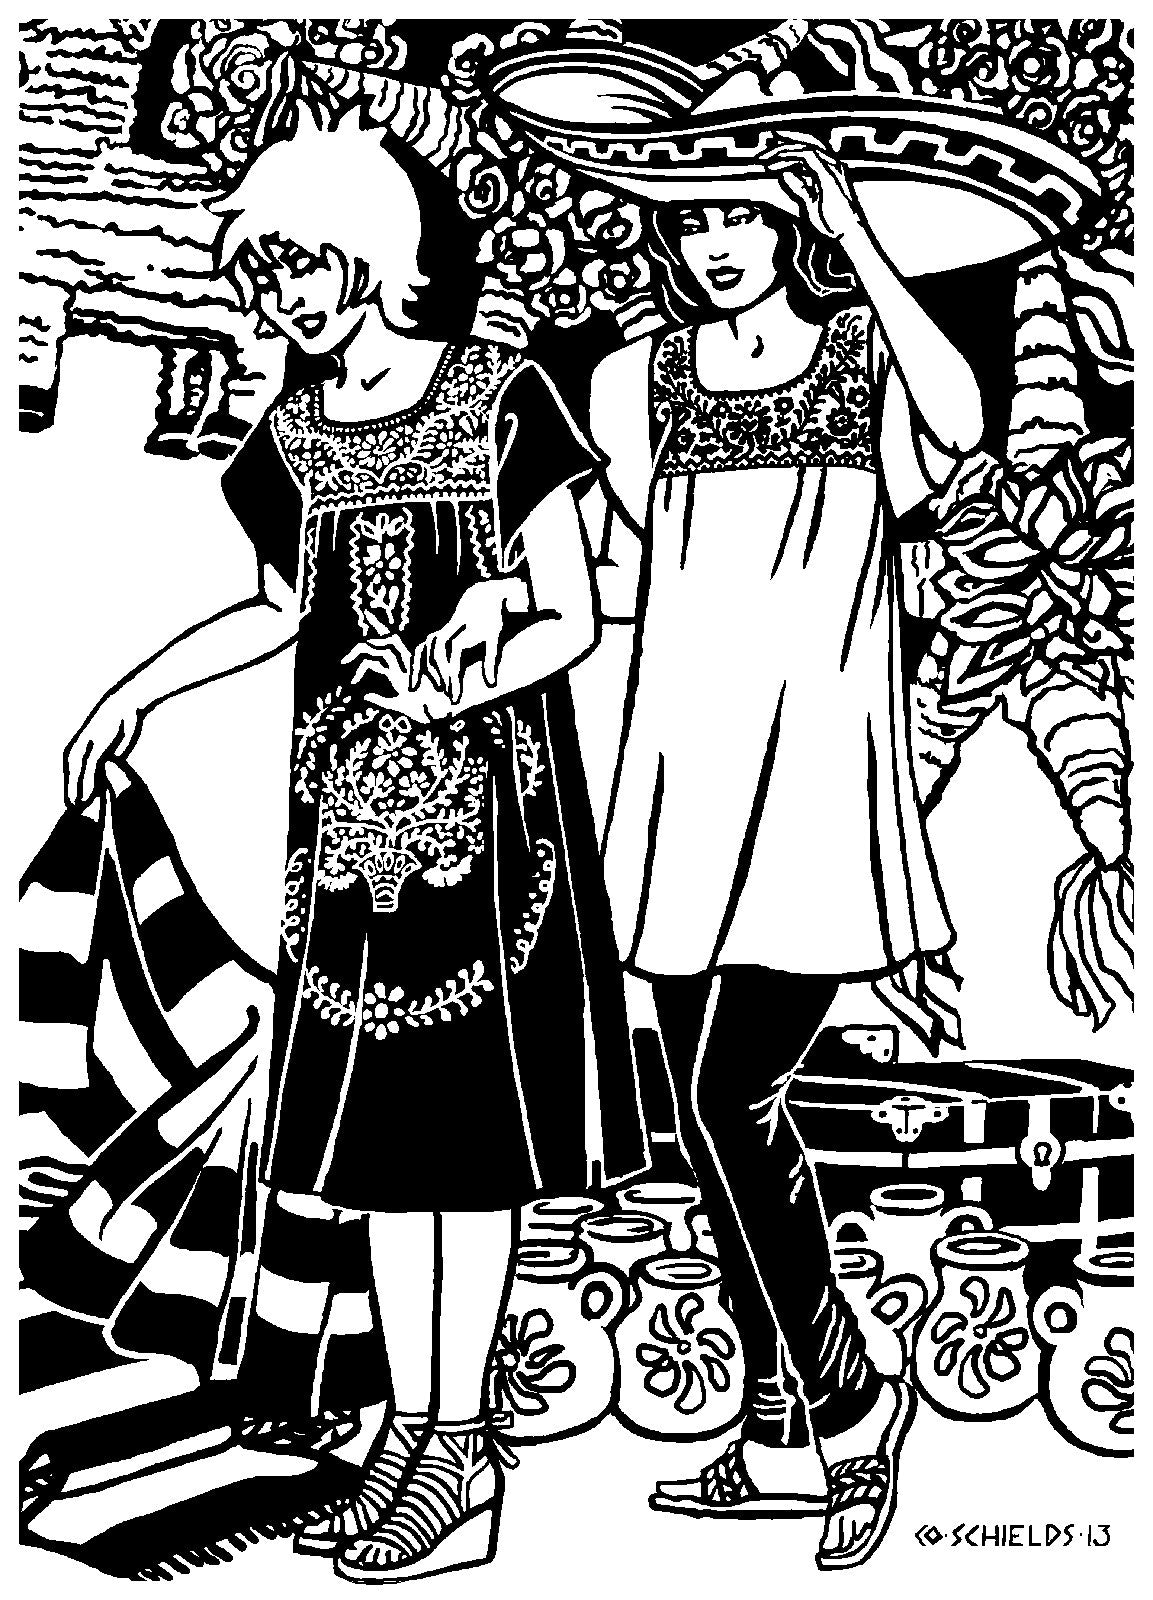 Black and white pen and ink drawing by artist Gretchen Shields.  Two women standing side by side woman on left wears Old Mexico Dress and woman on the right wears the Blouse length top.  Ceramics and pinatas ate in the background scene of a market place.